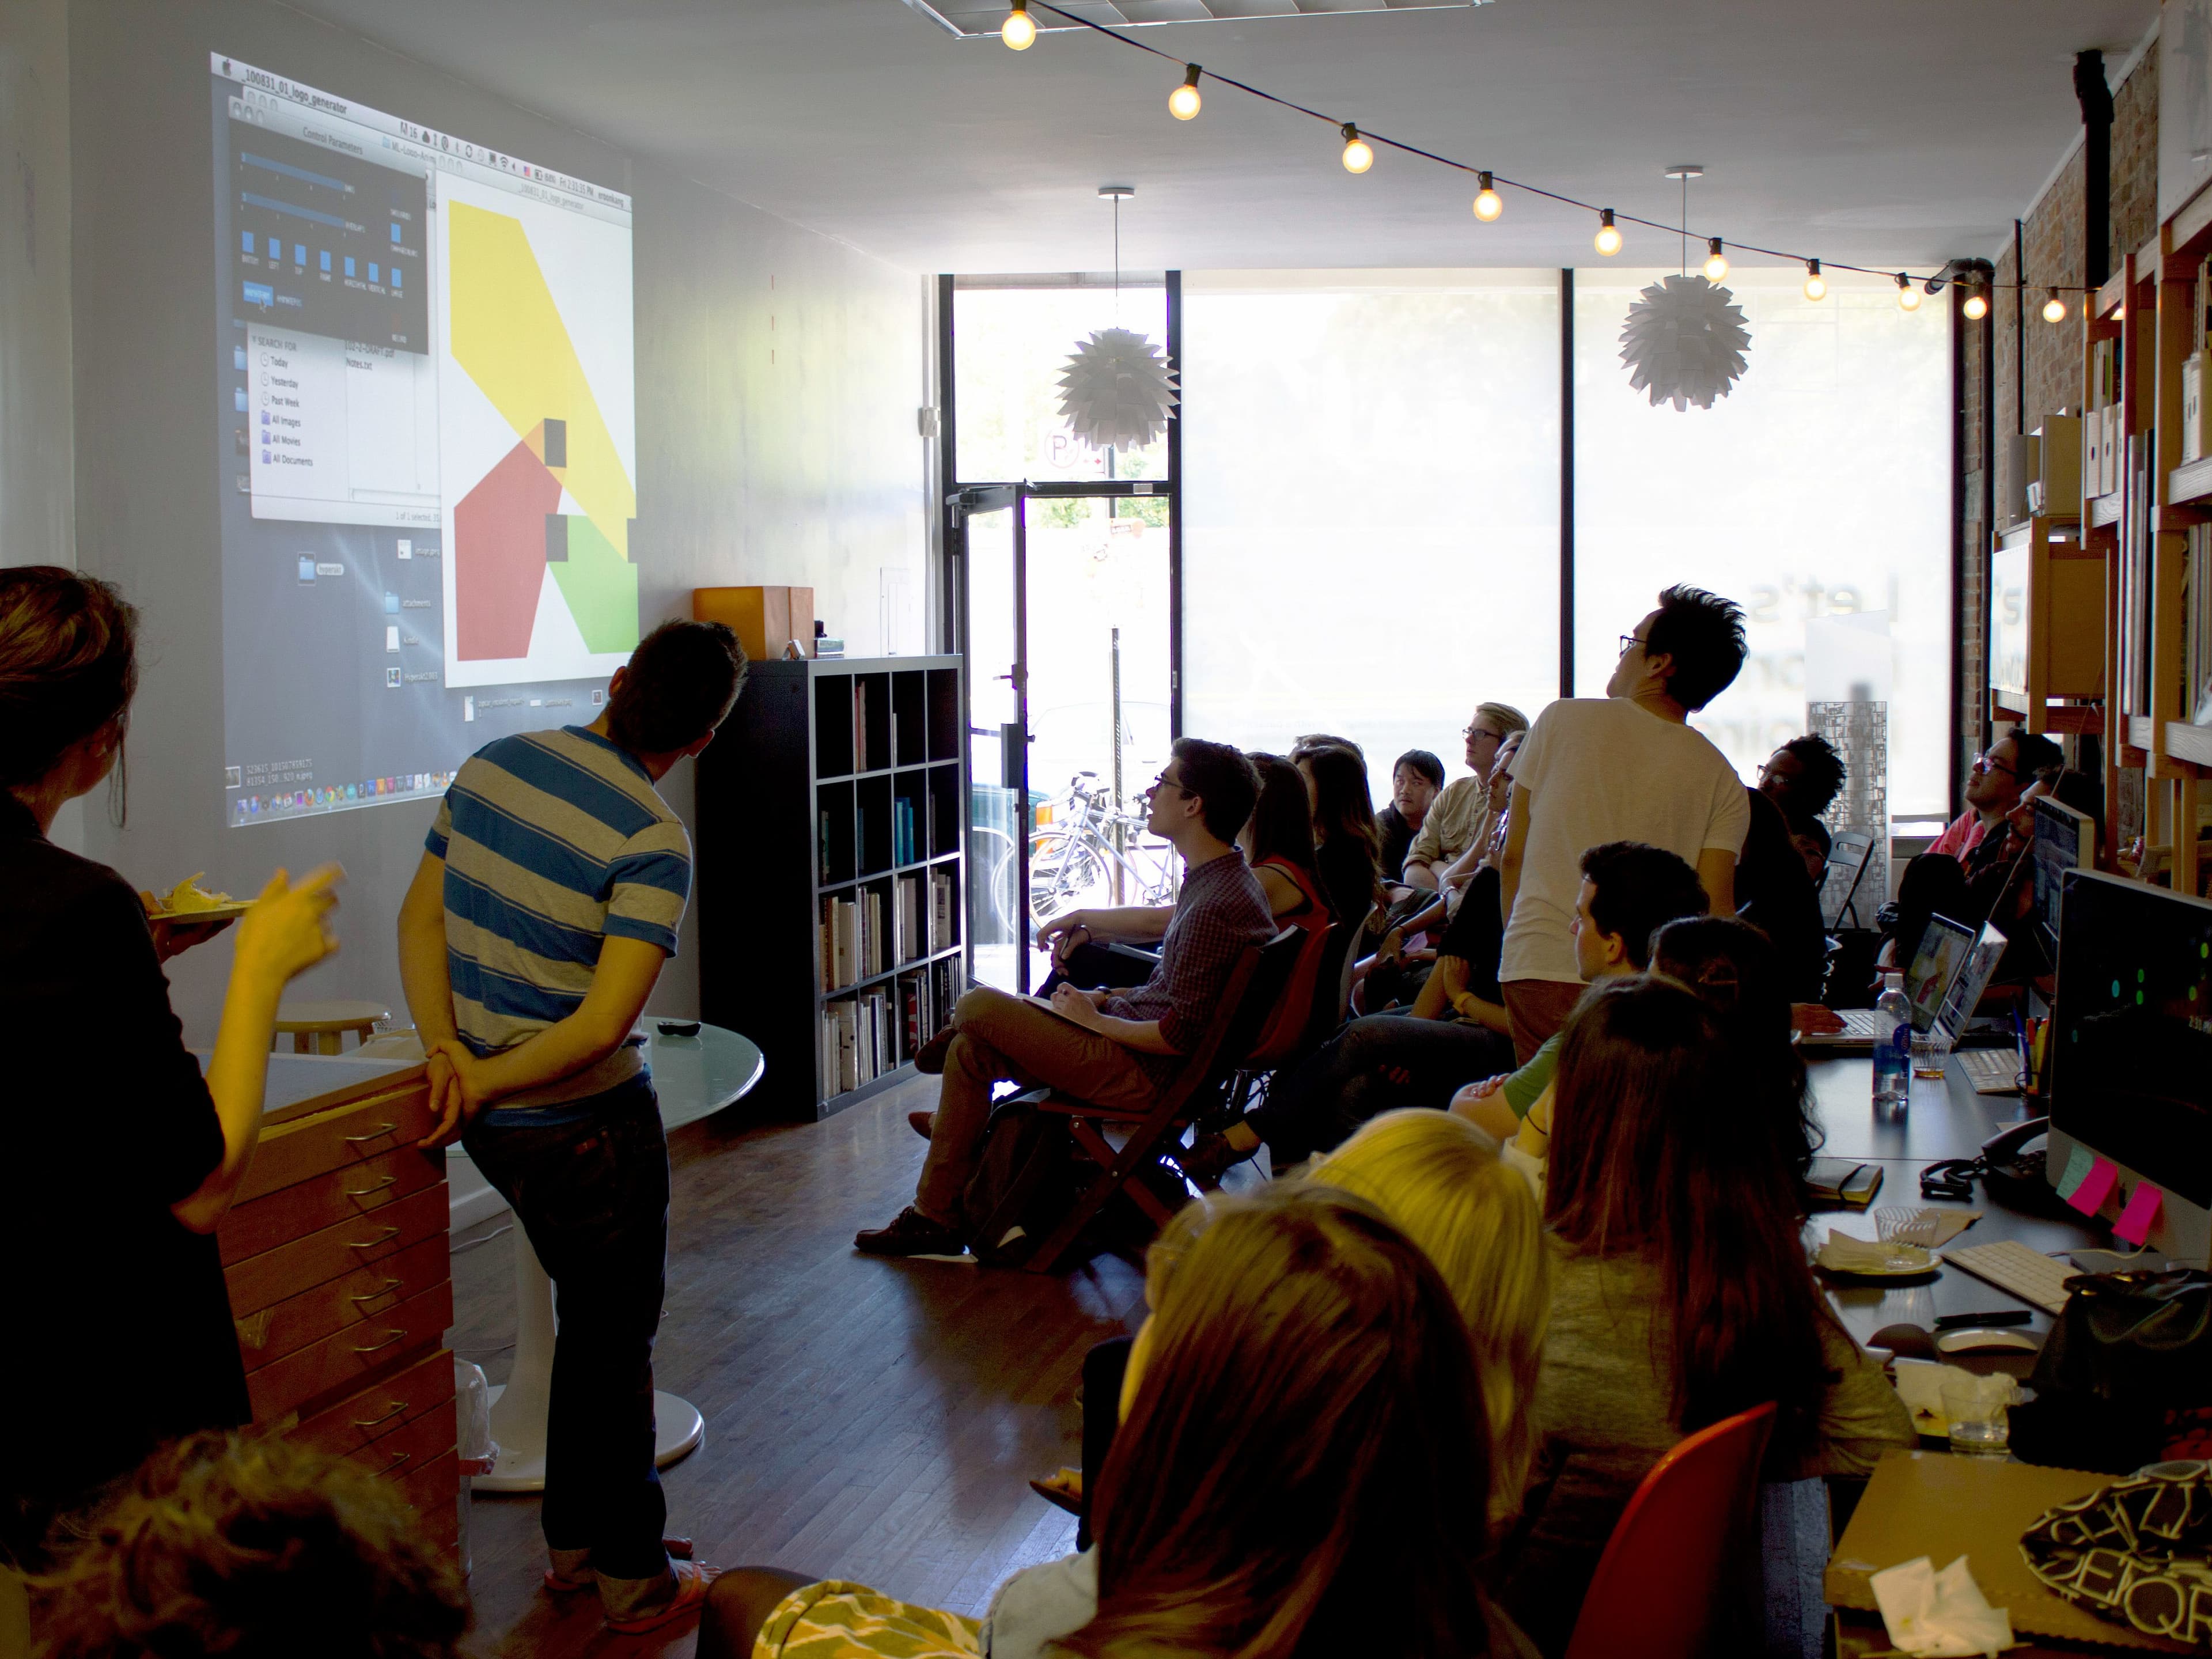 A group of people in a cozy, well-lit room watch a presentation projected on a wall. Some are seated, while others stand near the presenter, who is gesturing at the screen. Shelves with books and a large window are visible in the background.